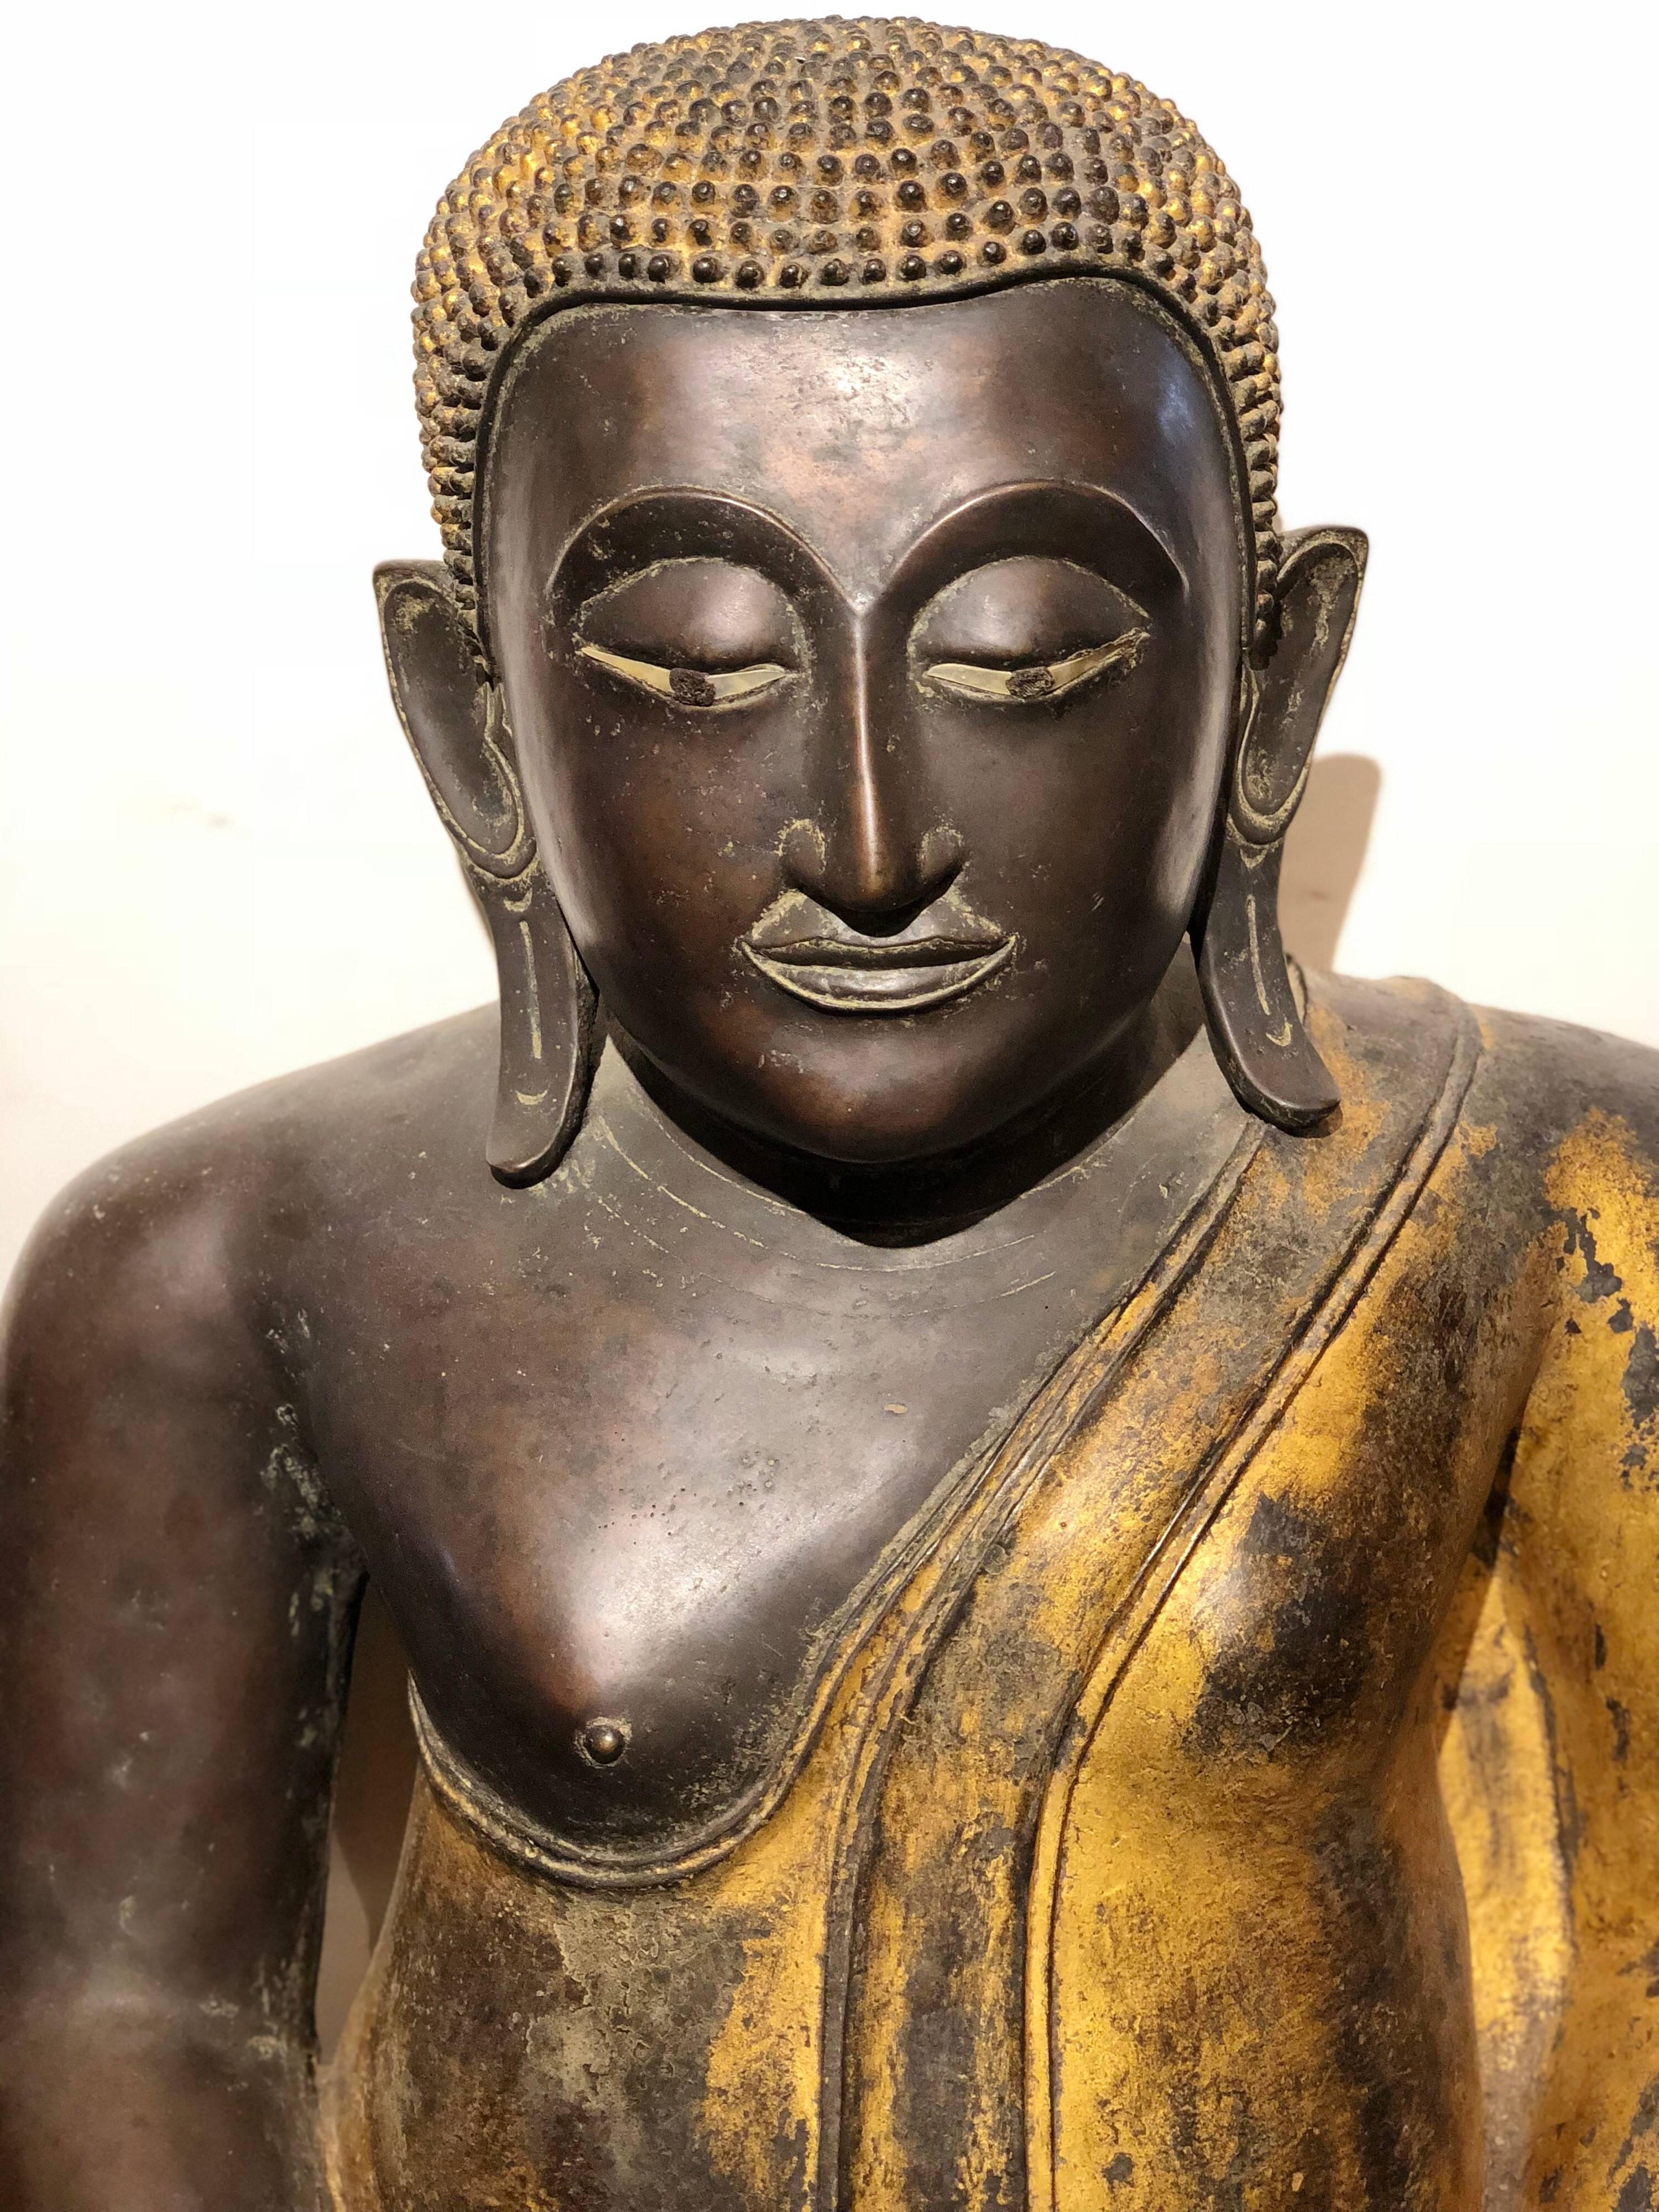 This majestic seated Buddha is from Rattanakosin Island, a historic area in the Phra Nakhon district in the city of Bangkok, Thailand. It is from the 19th century. It has bold black and gold colors and is made out of bronze.
Measures: 32 H x 32 L x